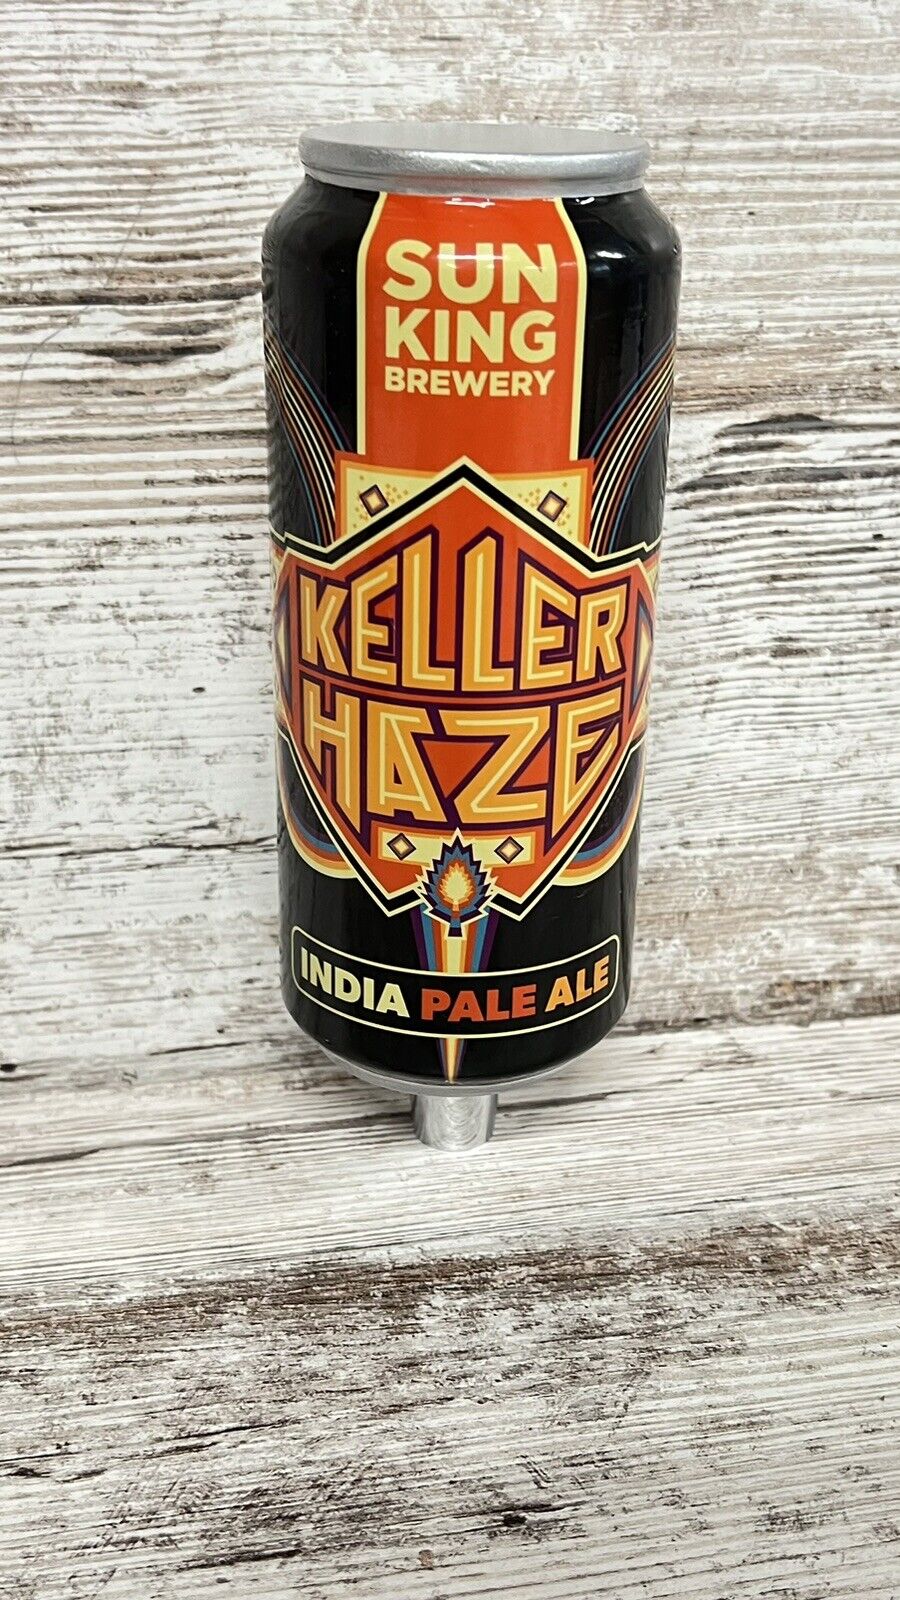 SUN KING BREWERY KELLER HAZE OUT BEER PUB TAVERN BAR TAPPER TAP HANDLE BEER CAN